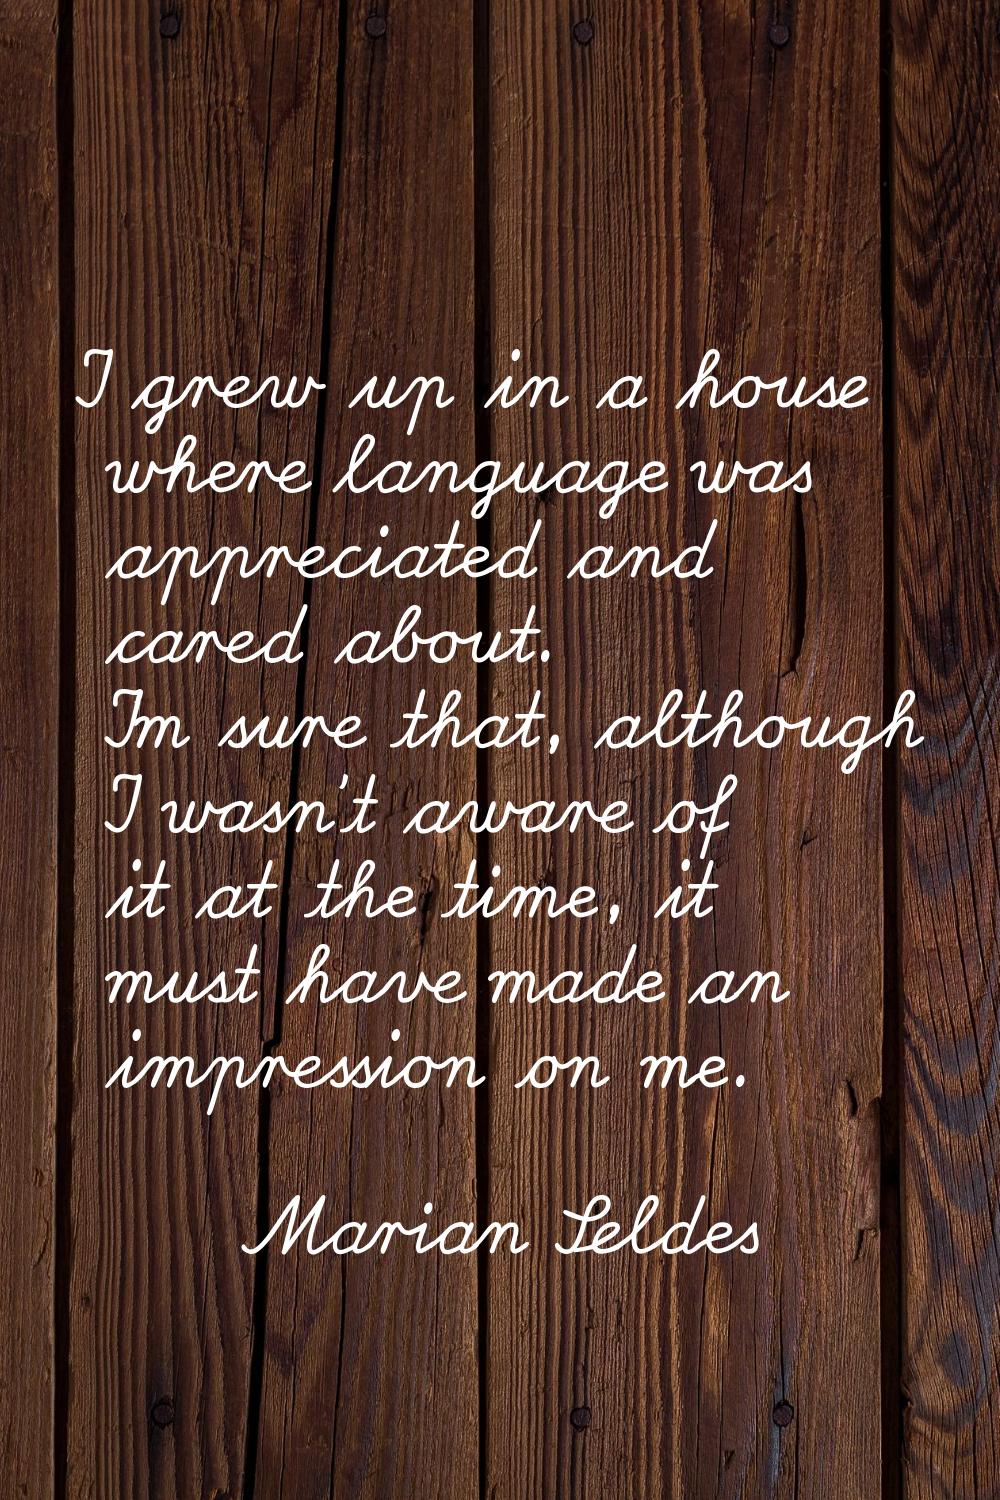 I grew up in a house where language was appreciated and cared about. I'm sure that, although I wasn